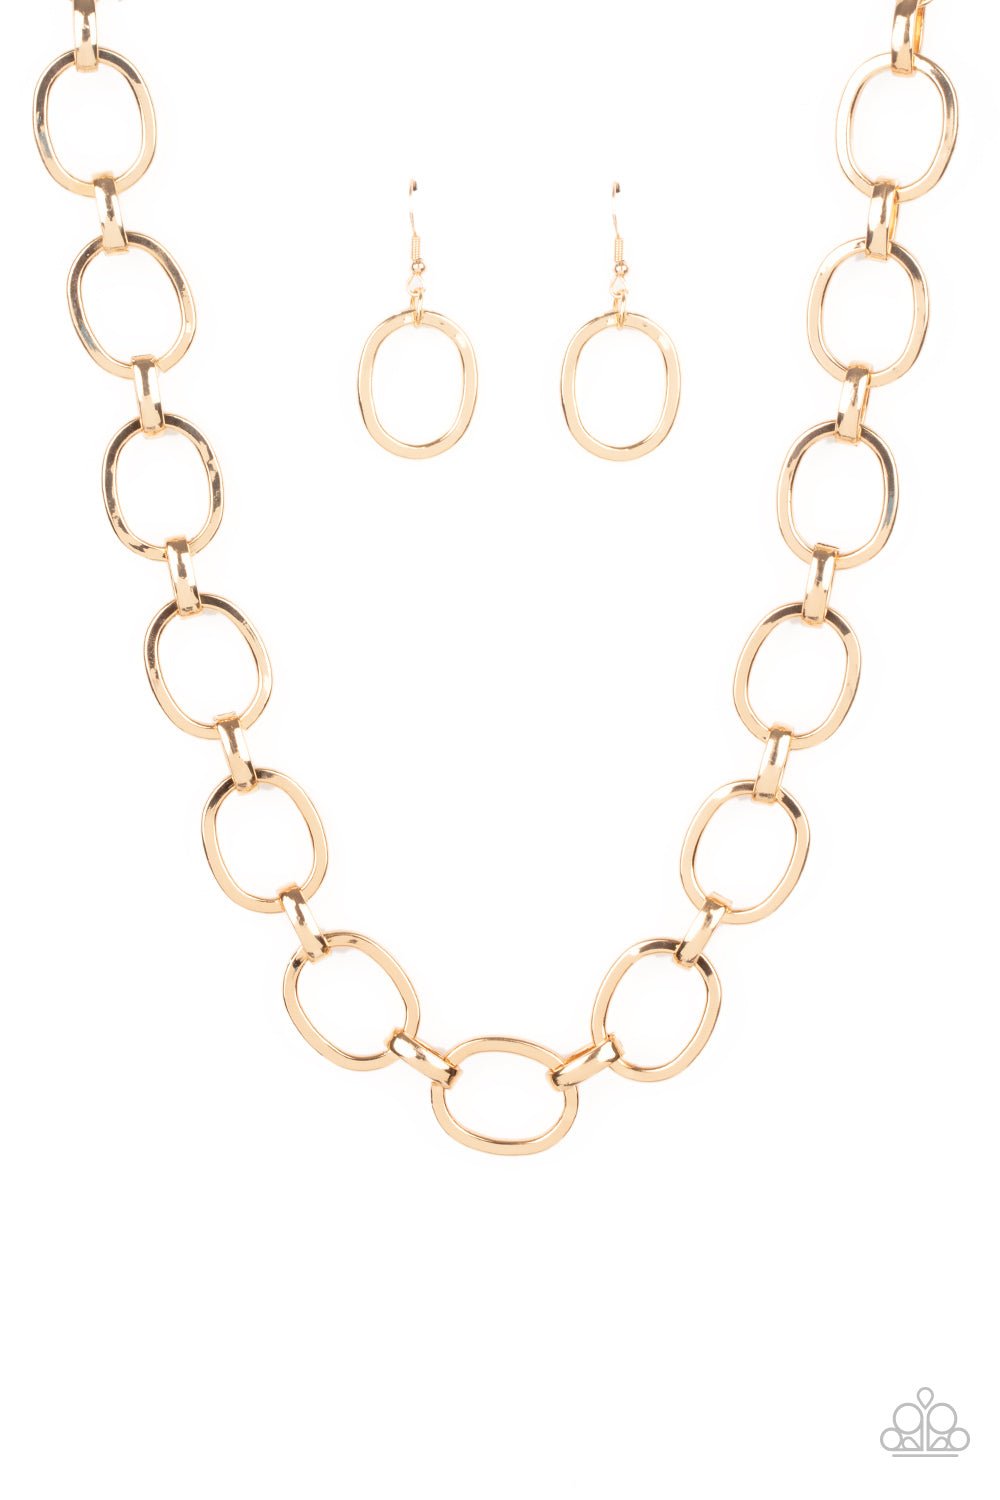 HAUTE-ly Contested Necklace (Gold, Black)